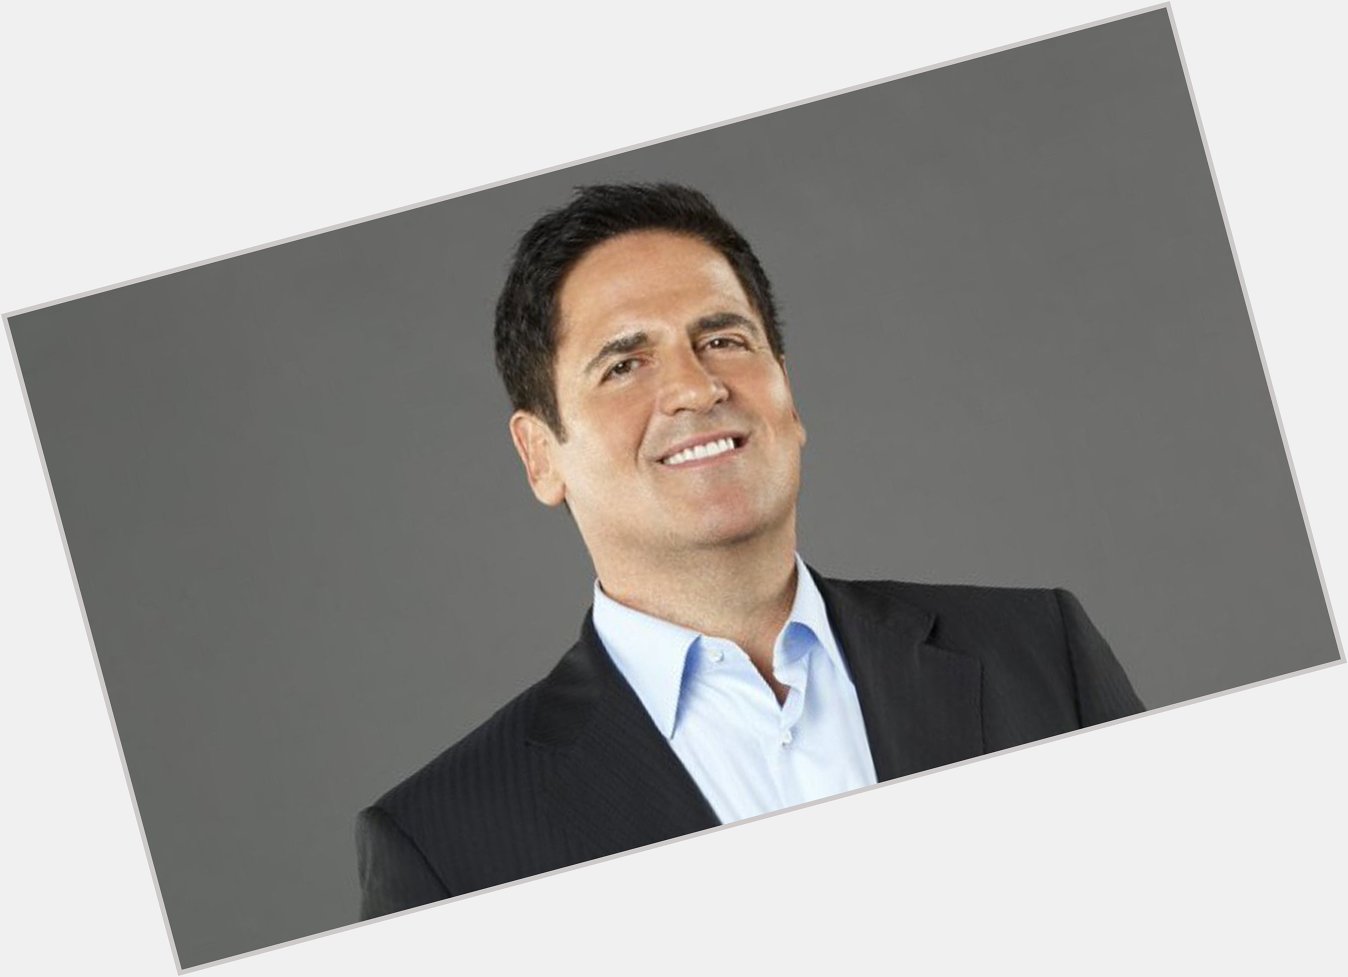 Sweat equity is the best equity. Mark Cuban
Happy Birthday 